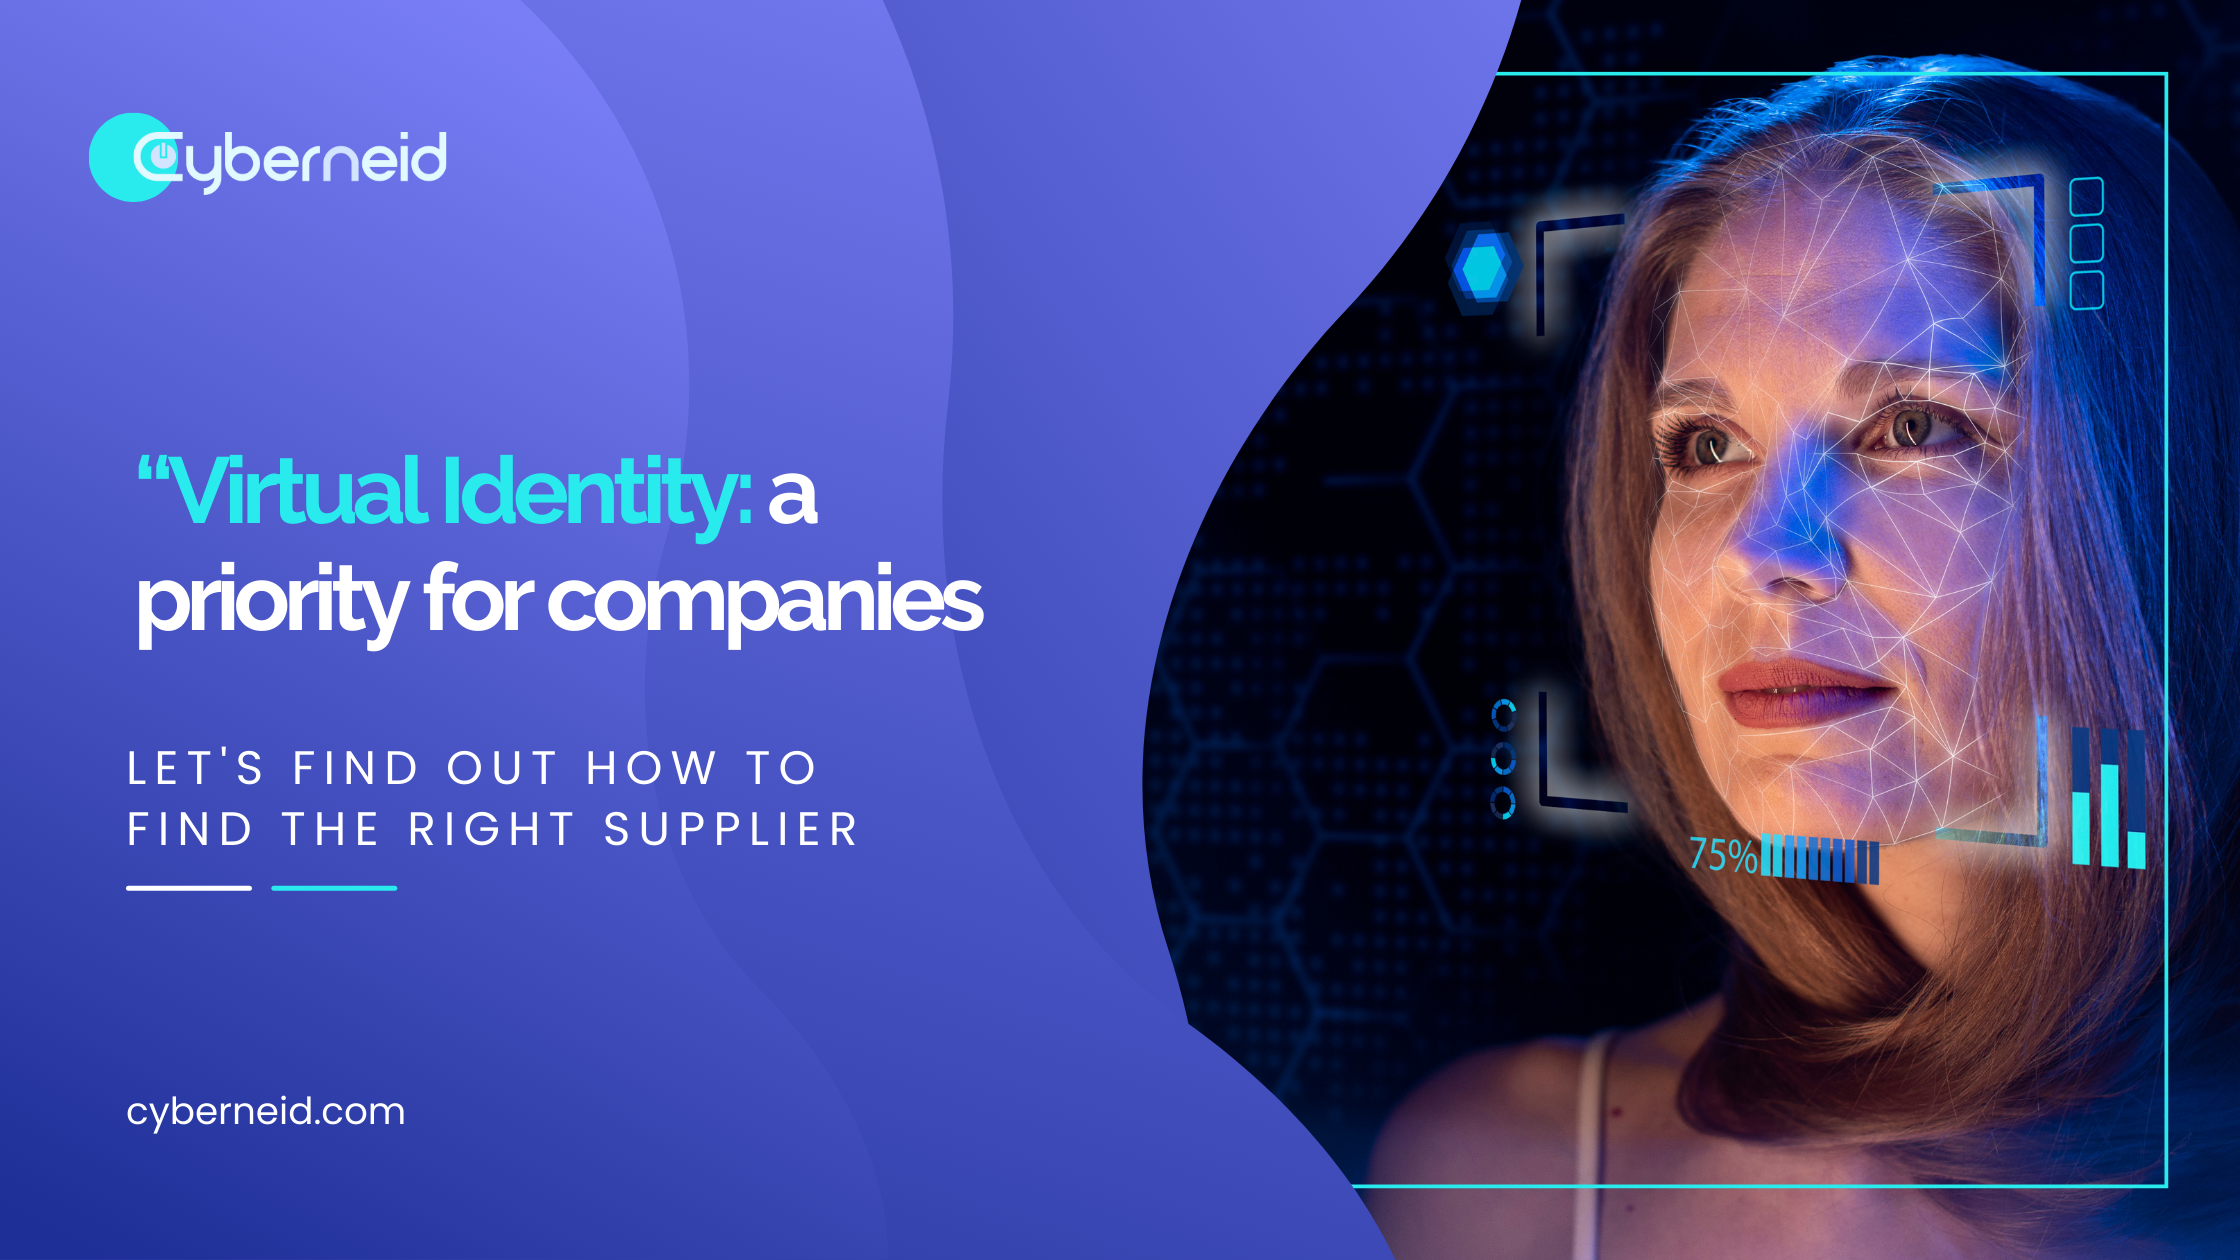 Virtual identity: a priority for companies